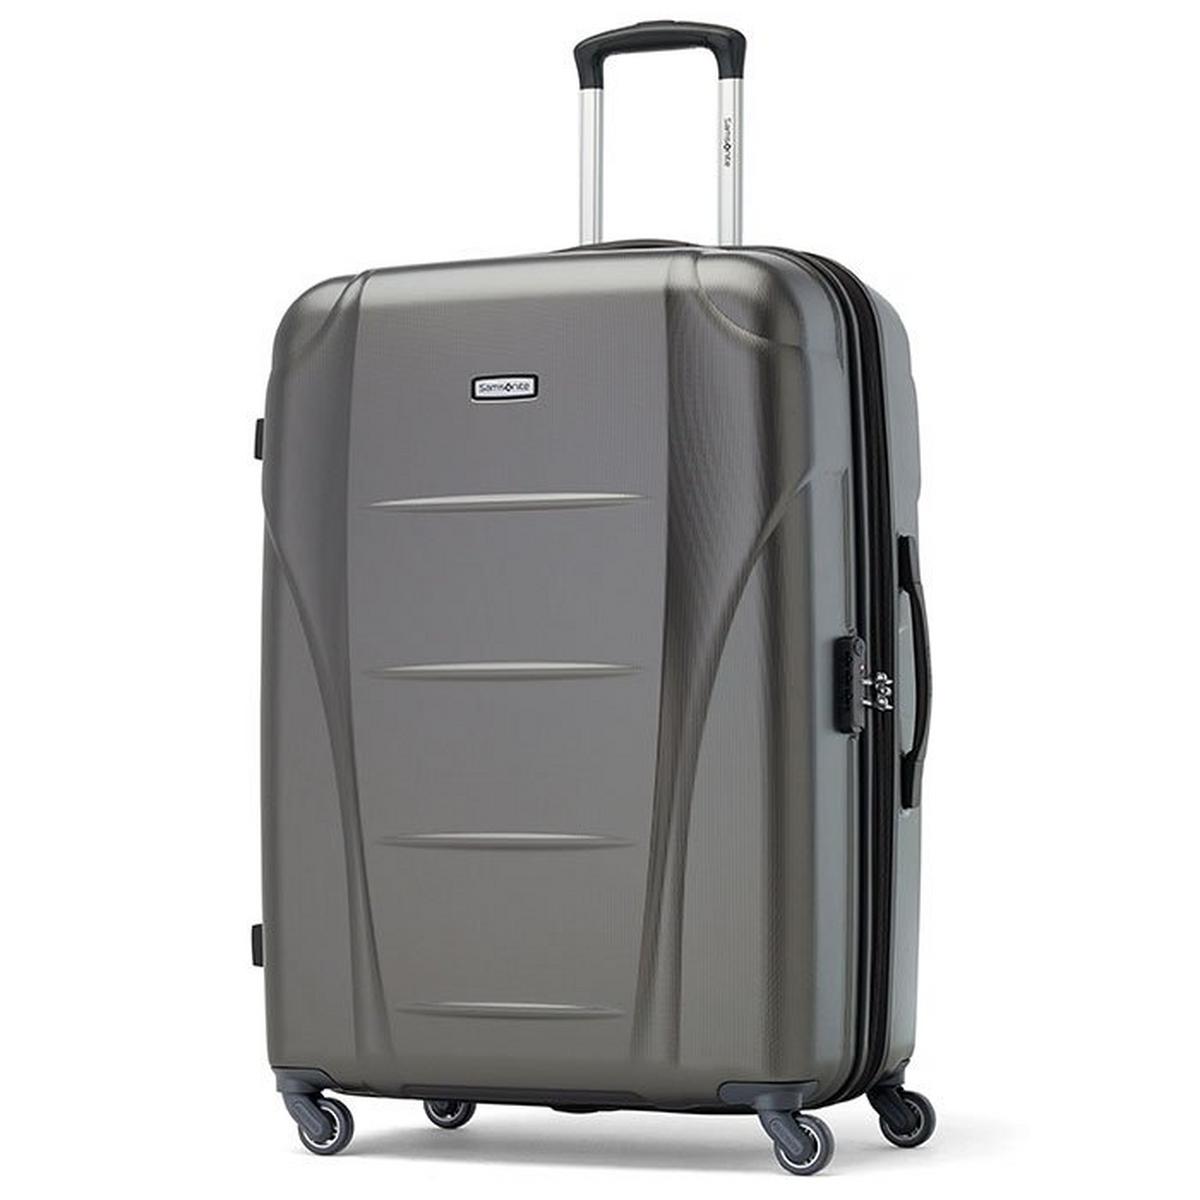 Winfield NXT Spinner Large Luggage